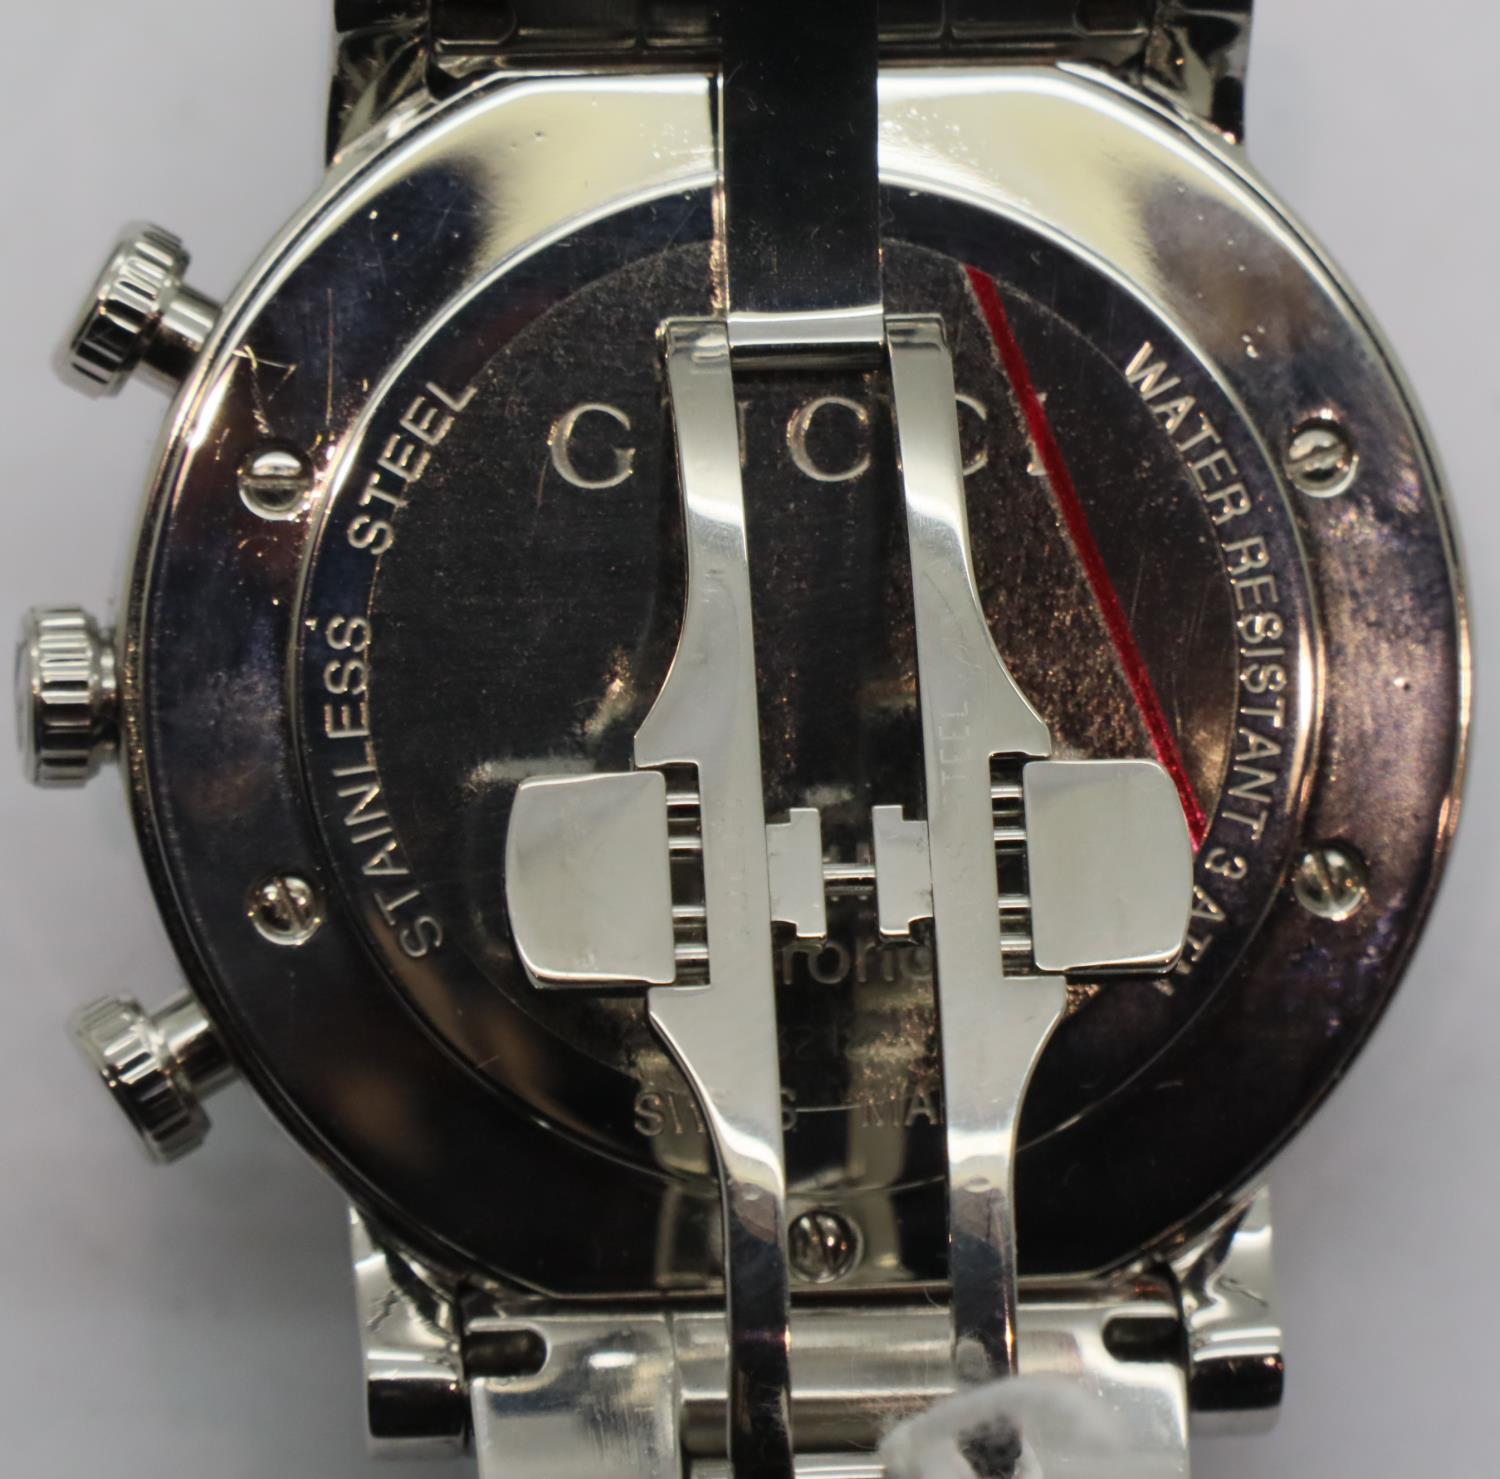 Gents Gucci chronograph wristwatch, having a black dial, stainless steel body and bracelet in - Image 3 of 5